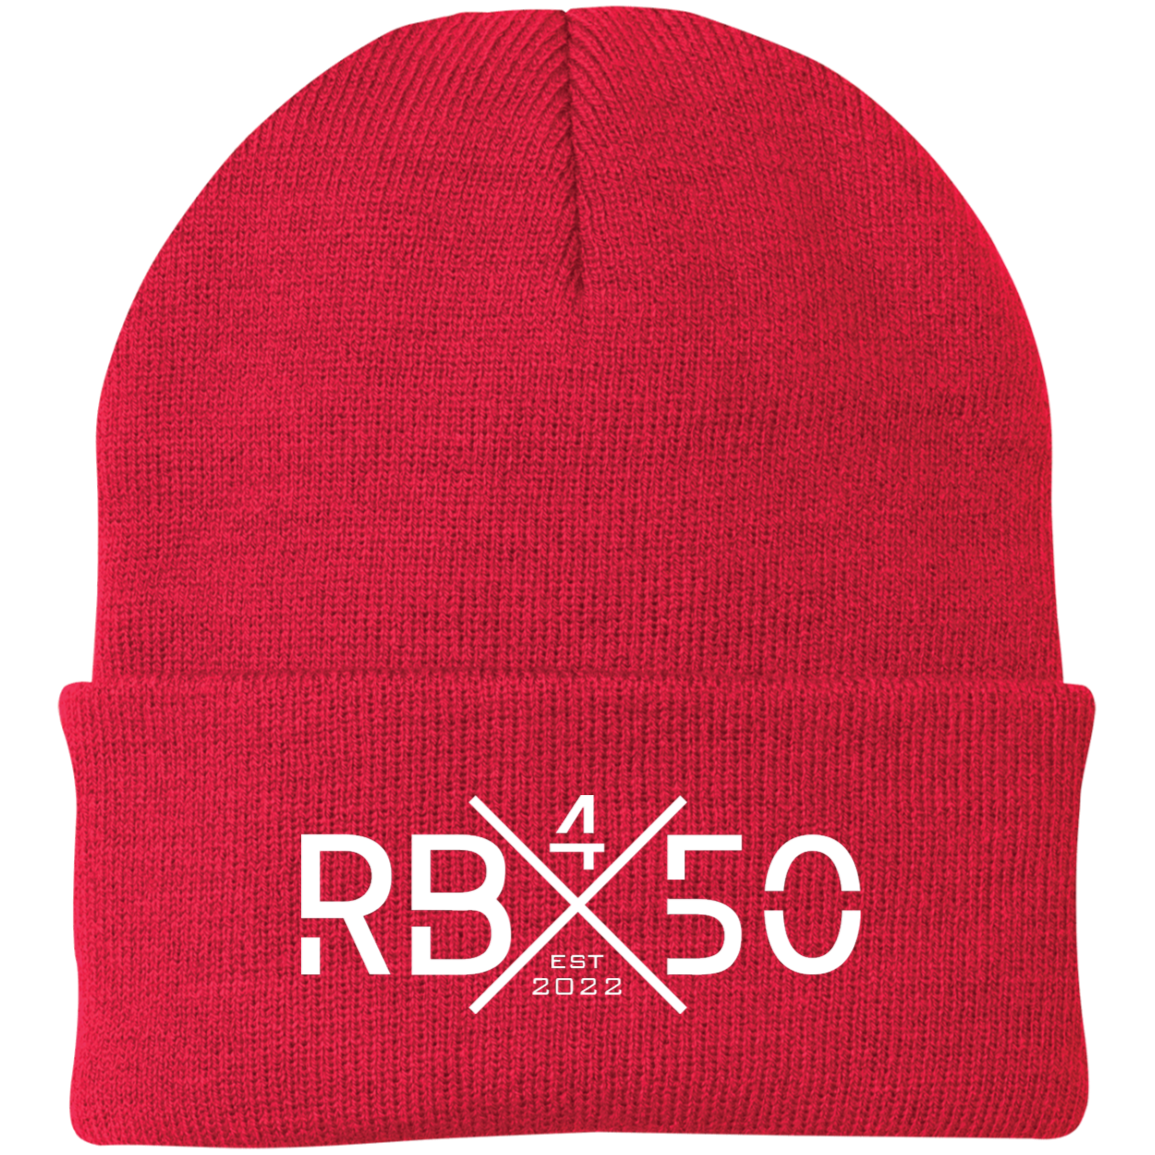 RB450 Knitted Cap